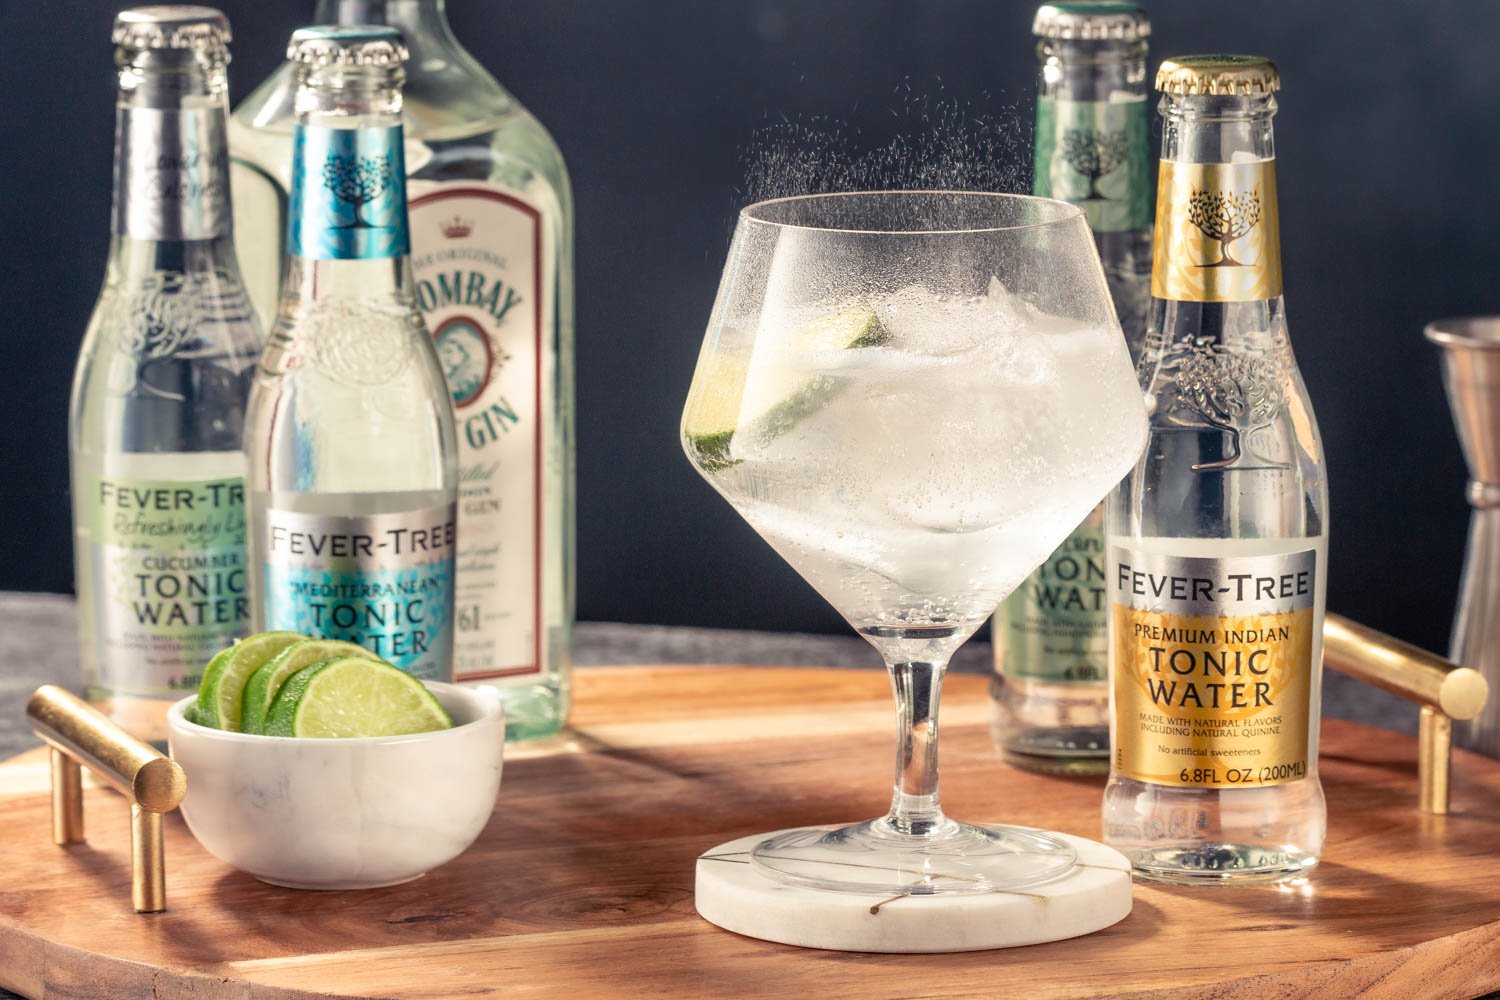 Gin and Tonic Recipe (+ 3 Ways to Customize It!)